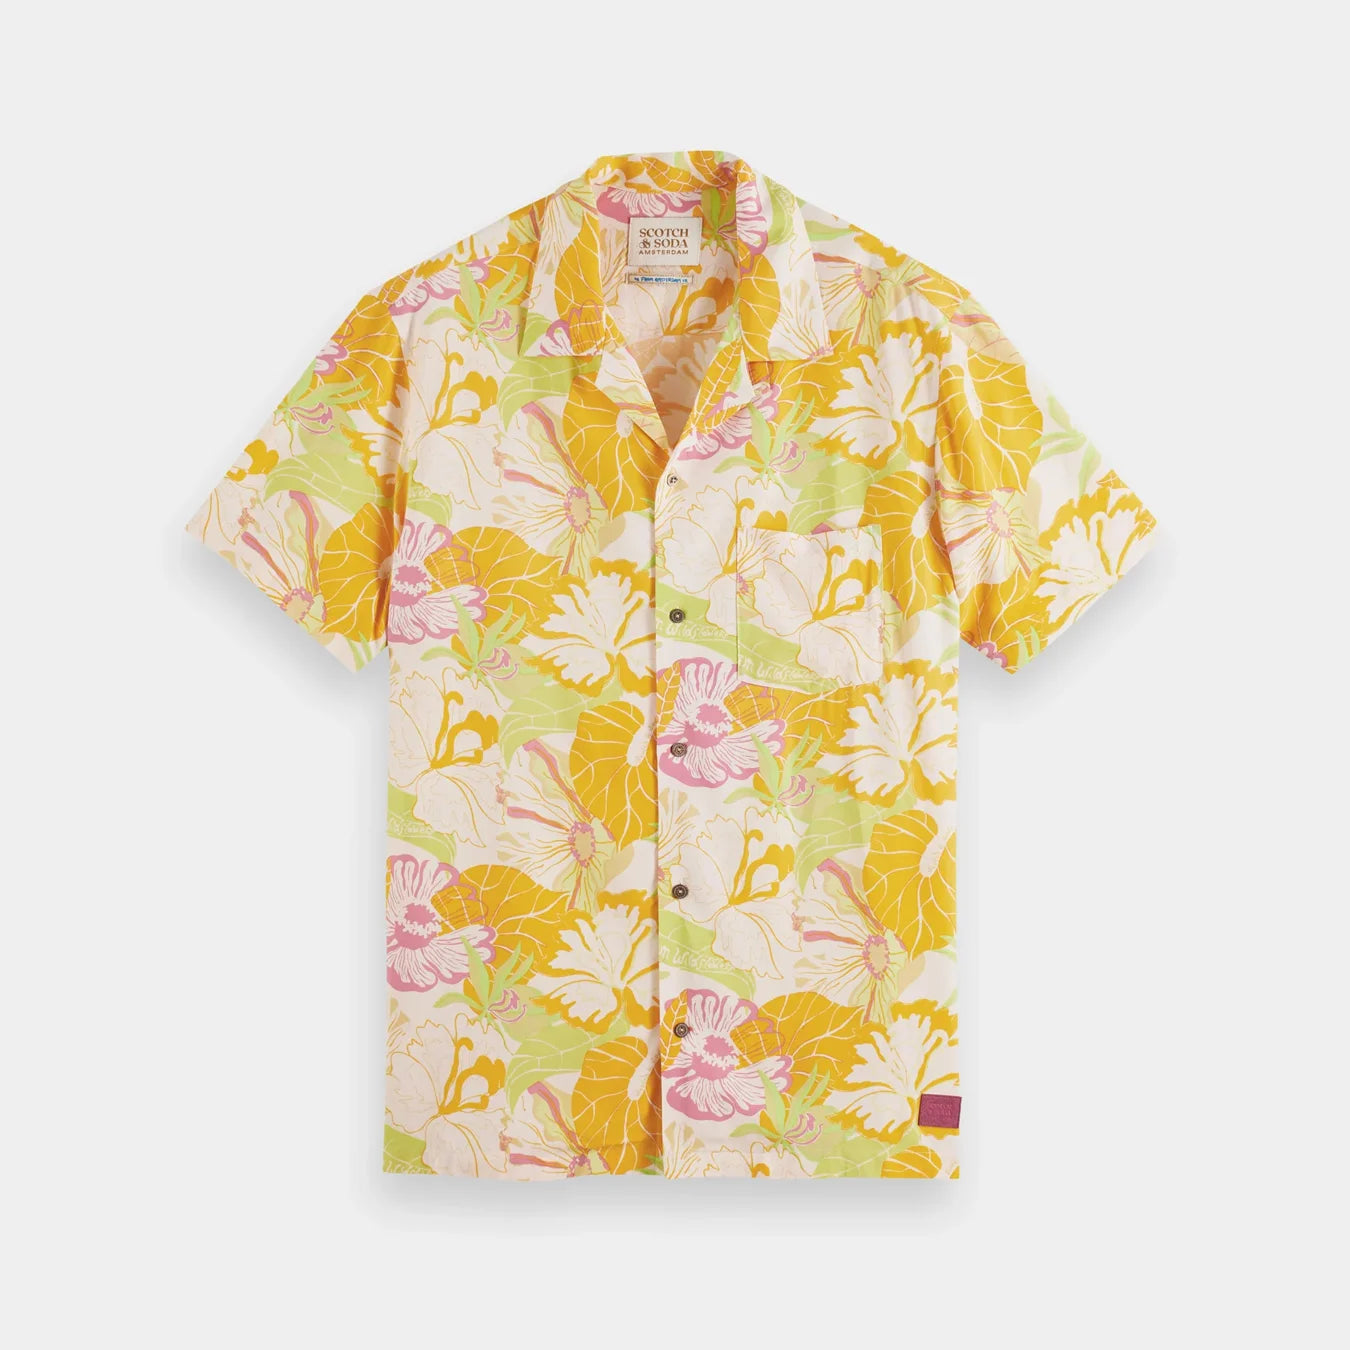 'Scotch & Soda Short Sleeve Floral Printed Camp Shirt' in 'Yellow' colour